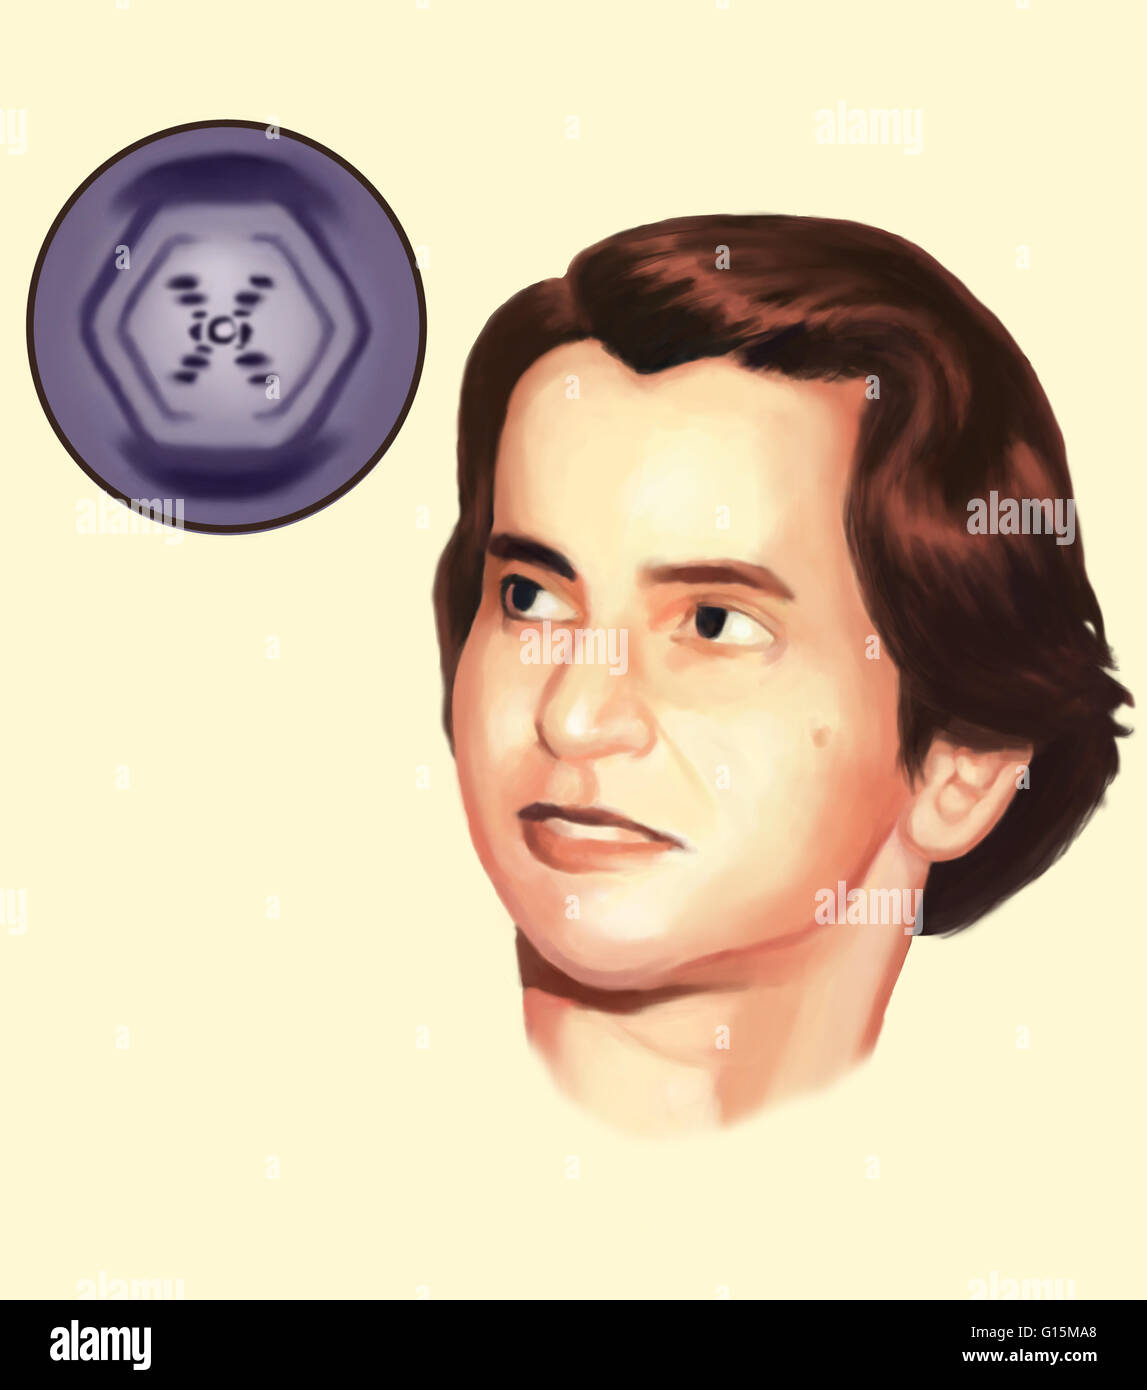 Rosalind Franklin. Illustration of Rosalind Franklin (1920-58), British X-ray crystallographer. Her work producing X-ray images of DNA (Deoxyribonucleic acid) was crucial in the discovery of the structure of DNA by James Watson and Francis Crick. Franklin Stock Photo